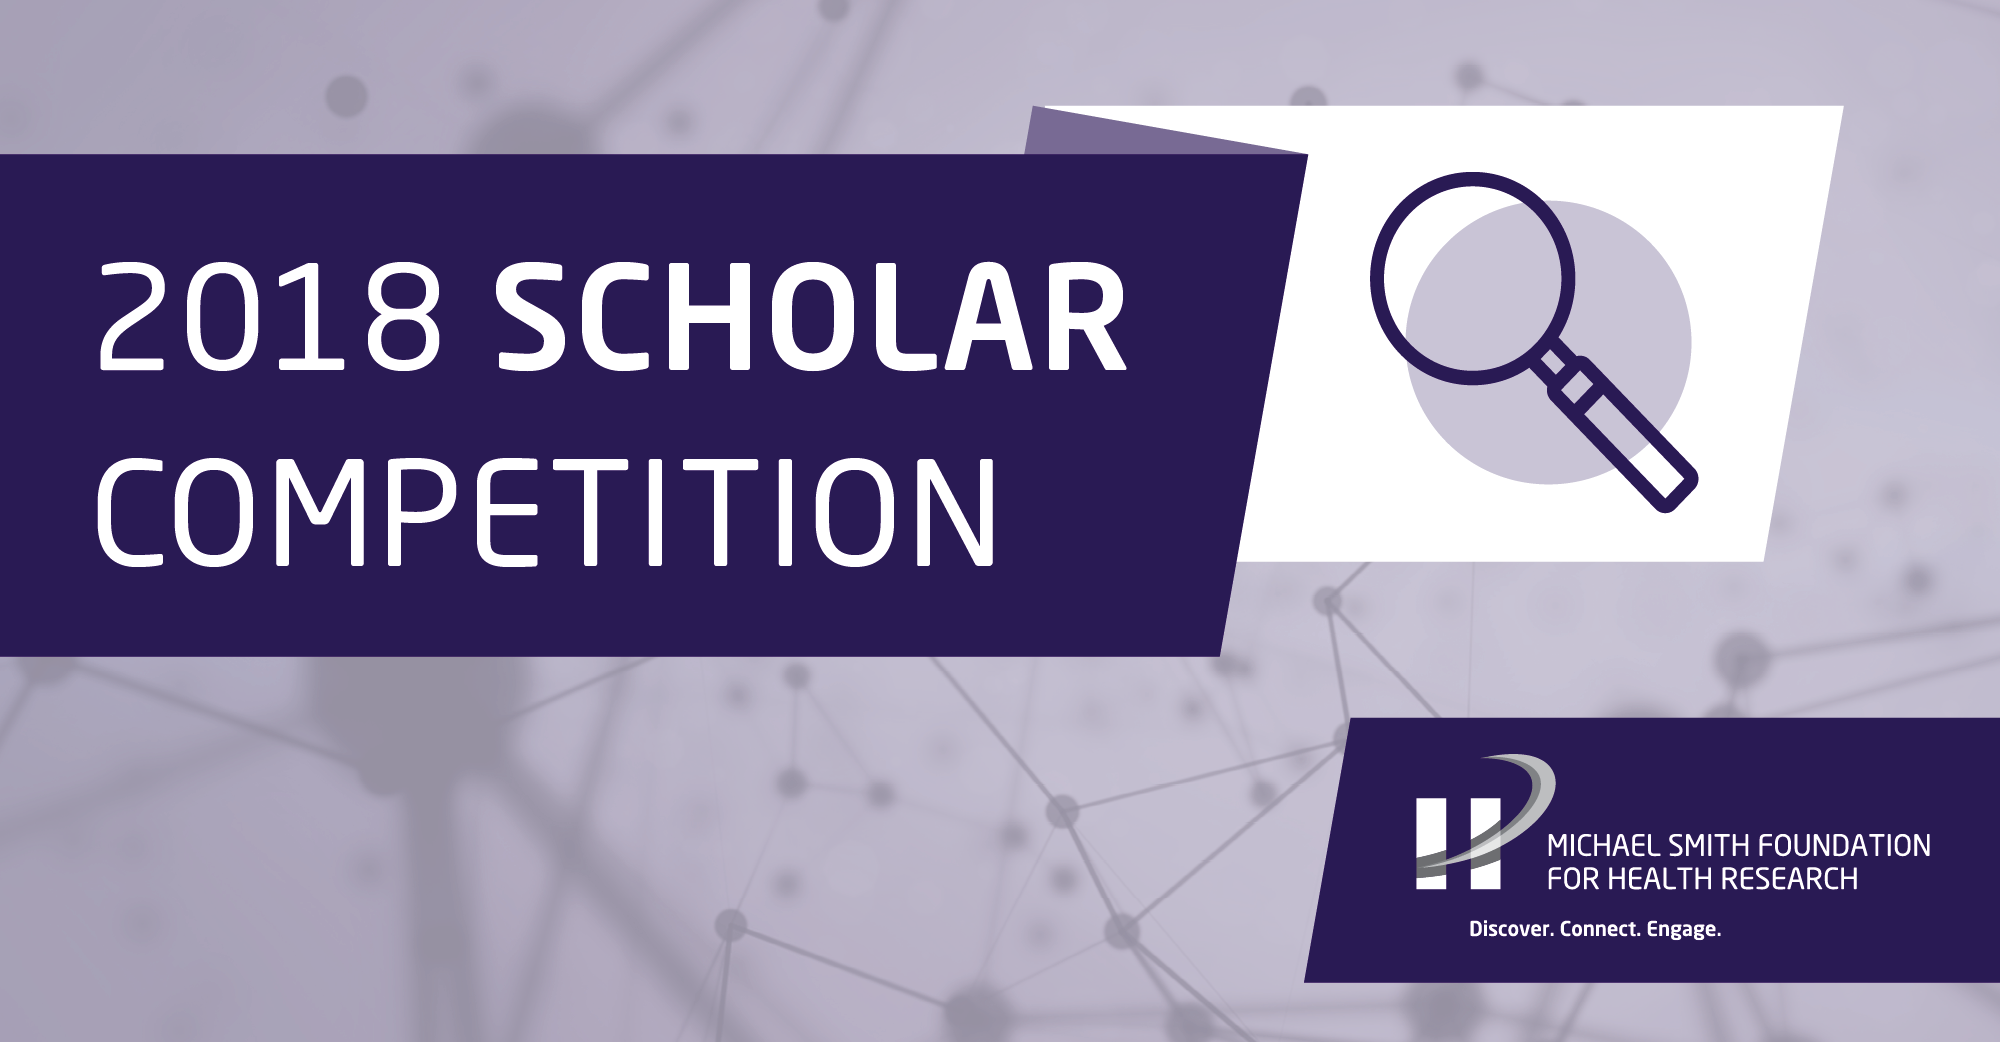 Applications open for MSFHR’s 2018 Scholar competition